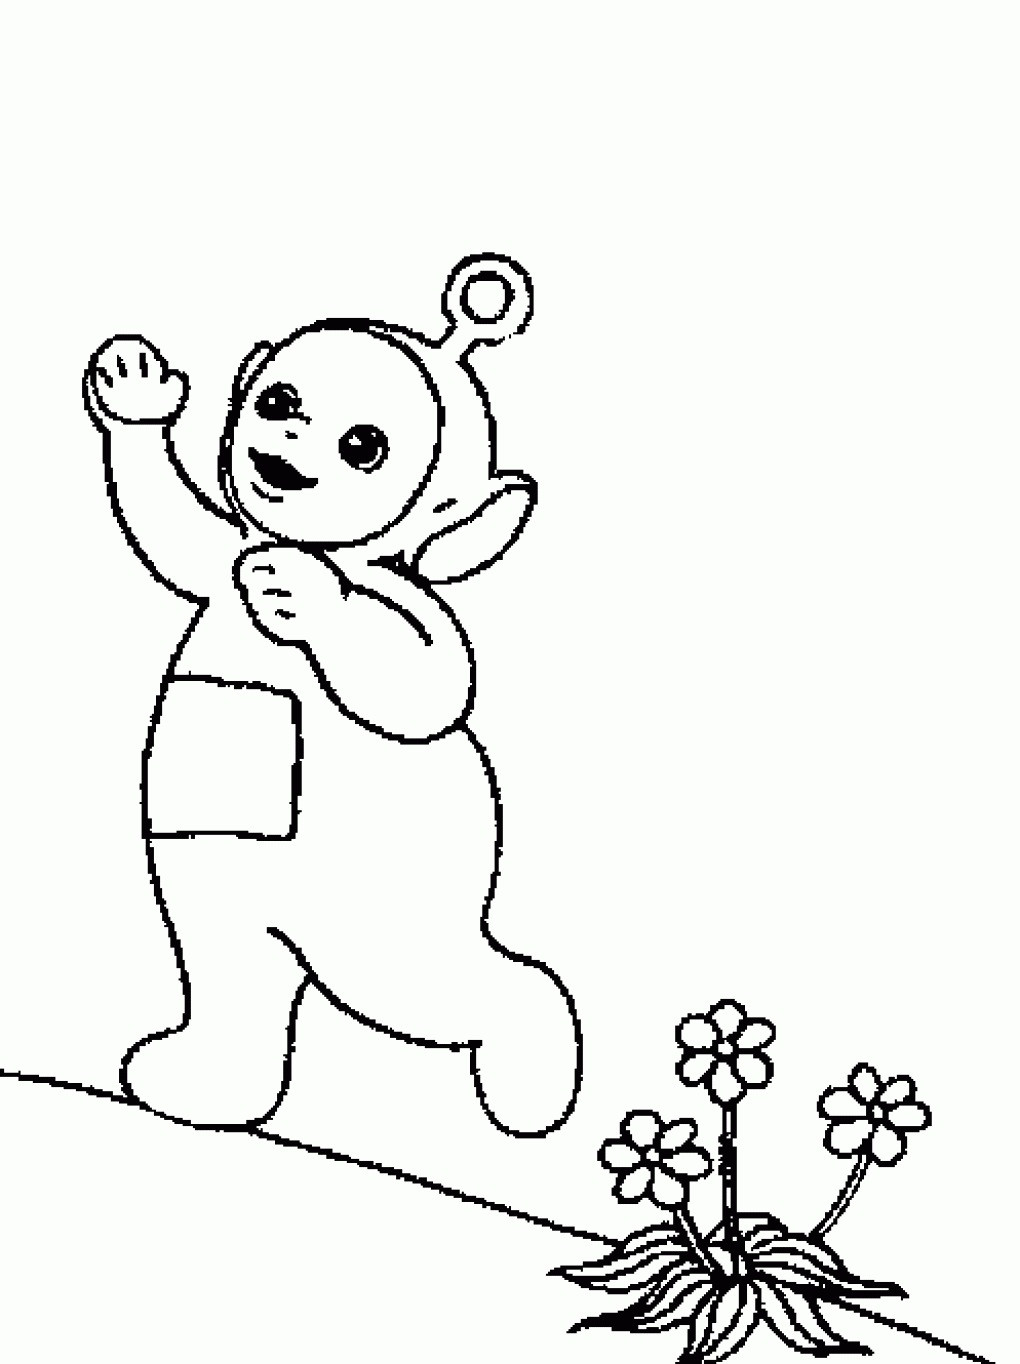 Printable Coloring Pages For Toddlers Free
 Free Printable Teletubbies Coloring Pages For Kids